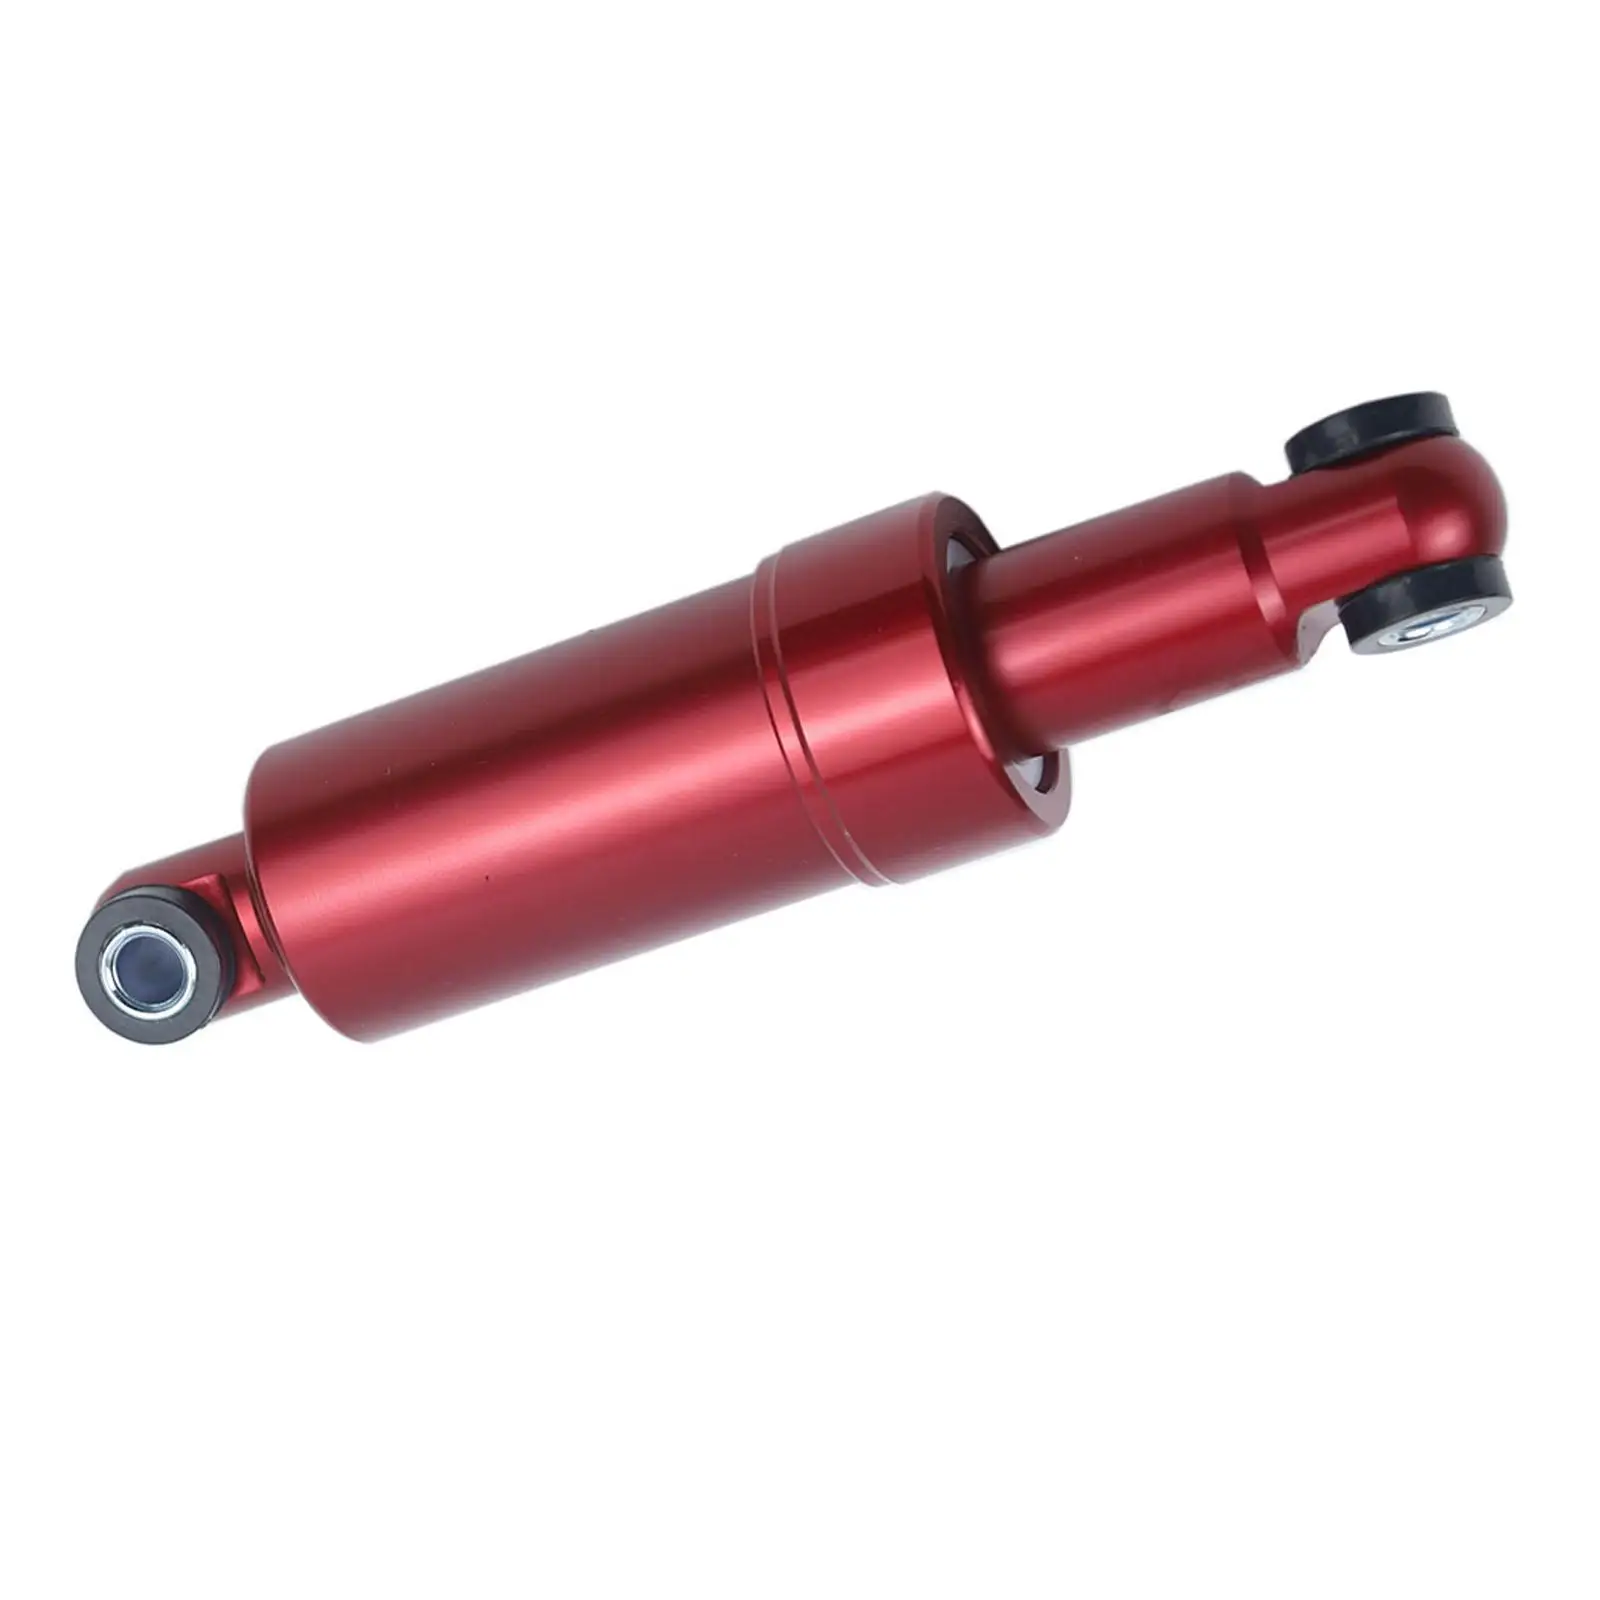 150mm Aluminum Alloy Rear Suspension Shock Absorber Replace for Electric Scooter